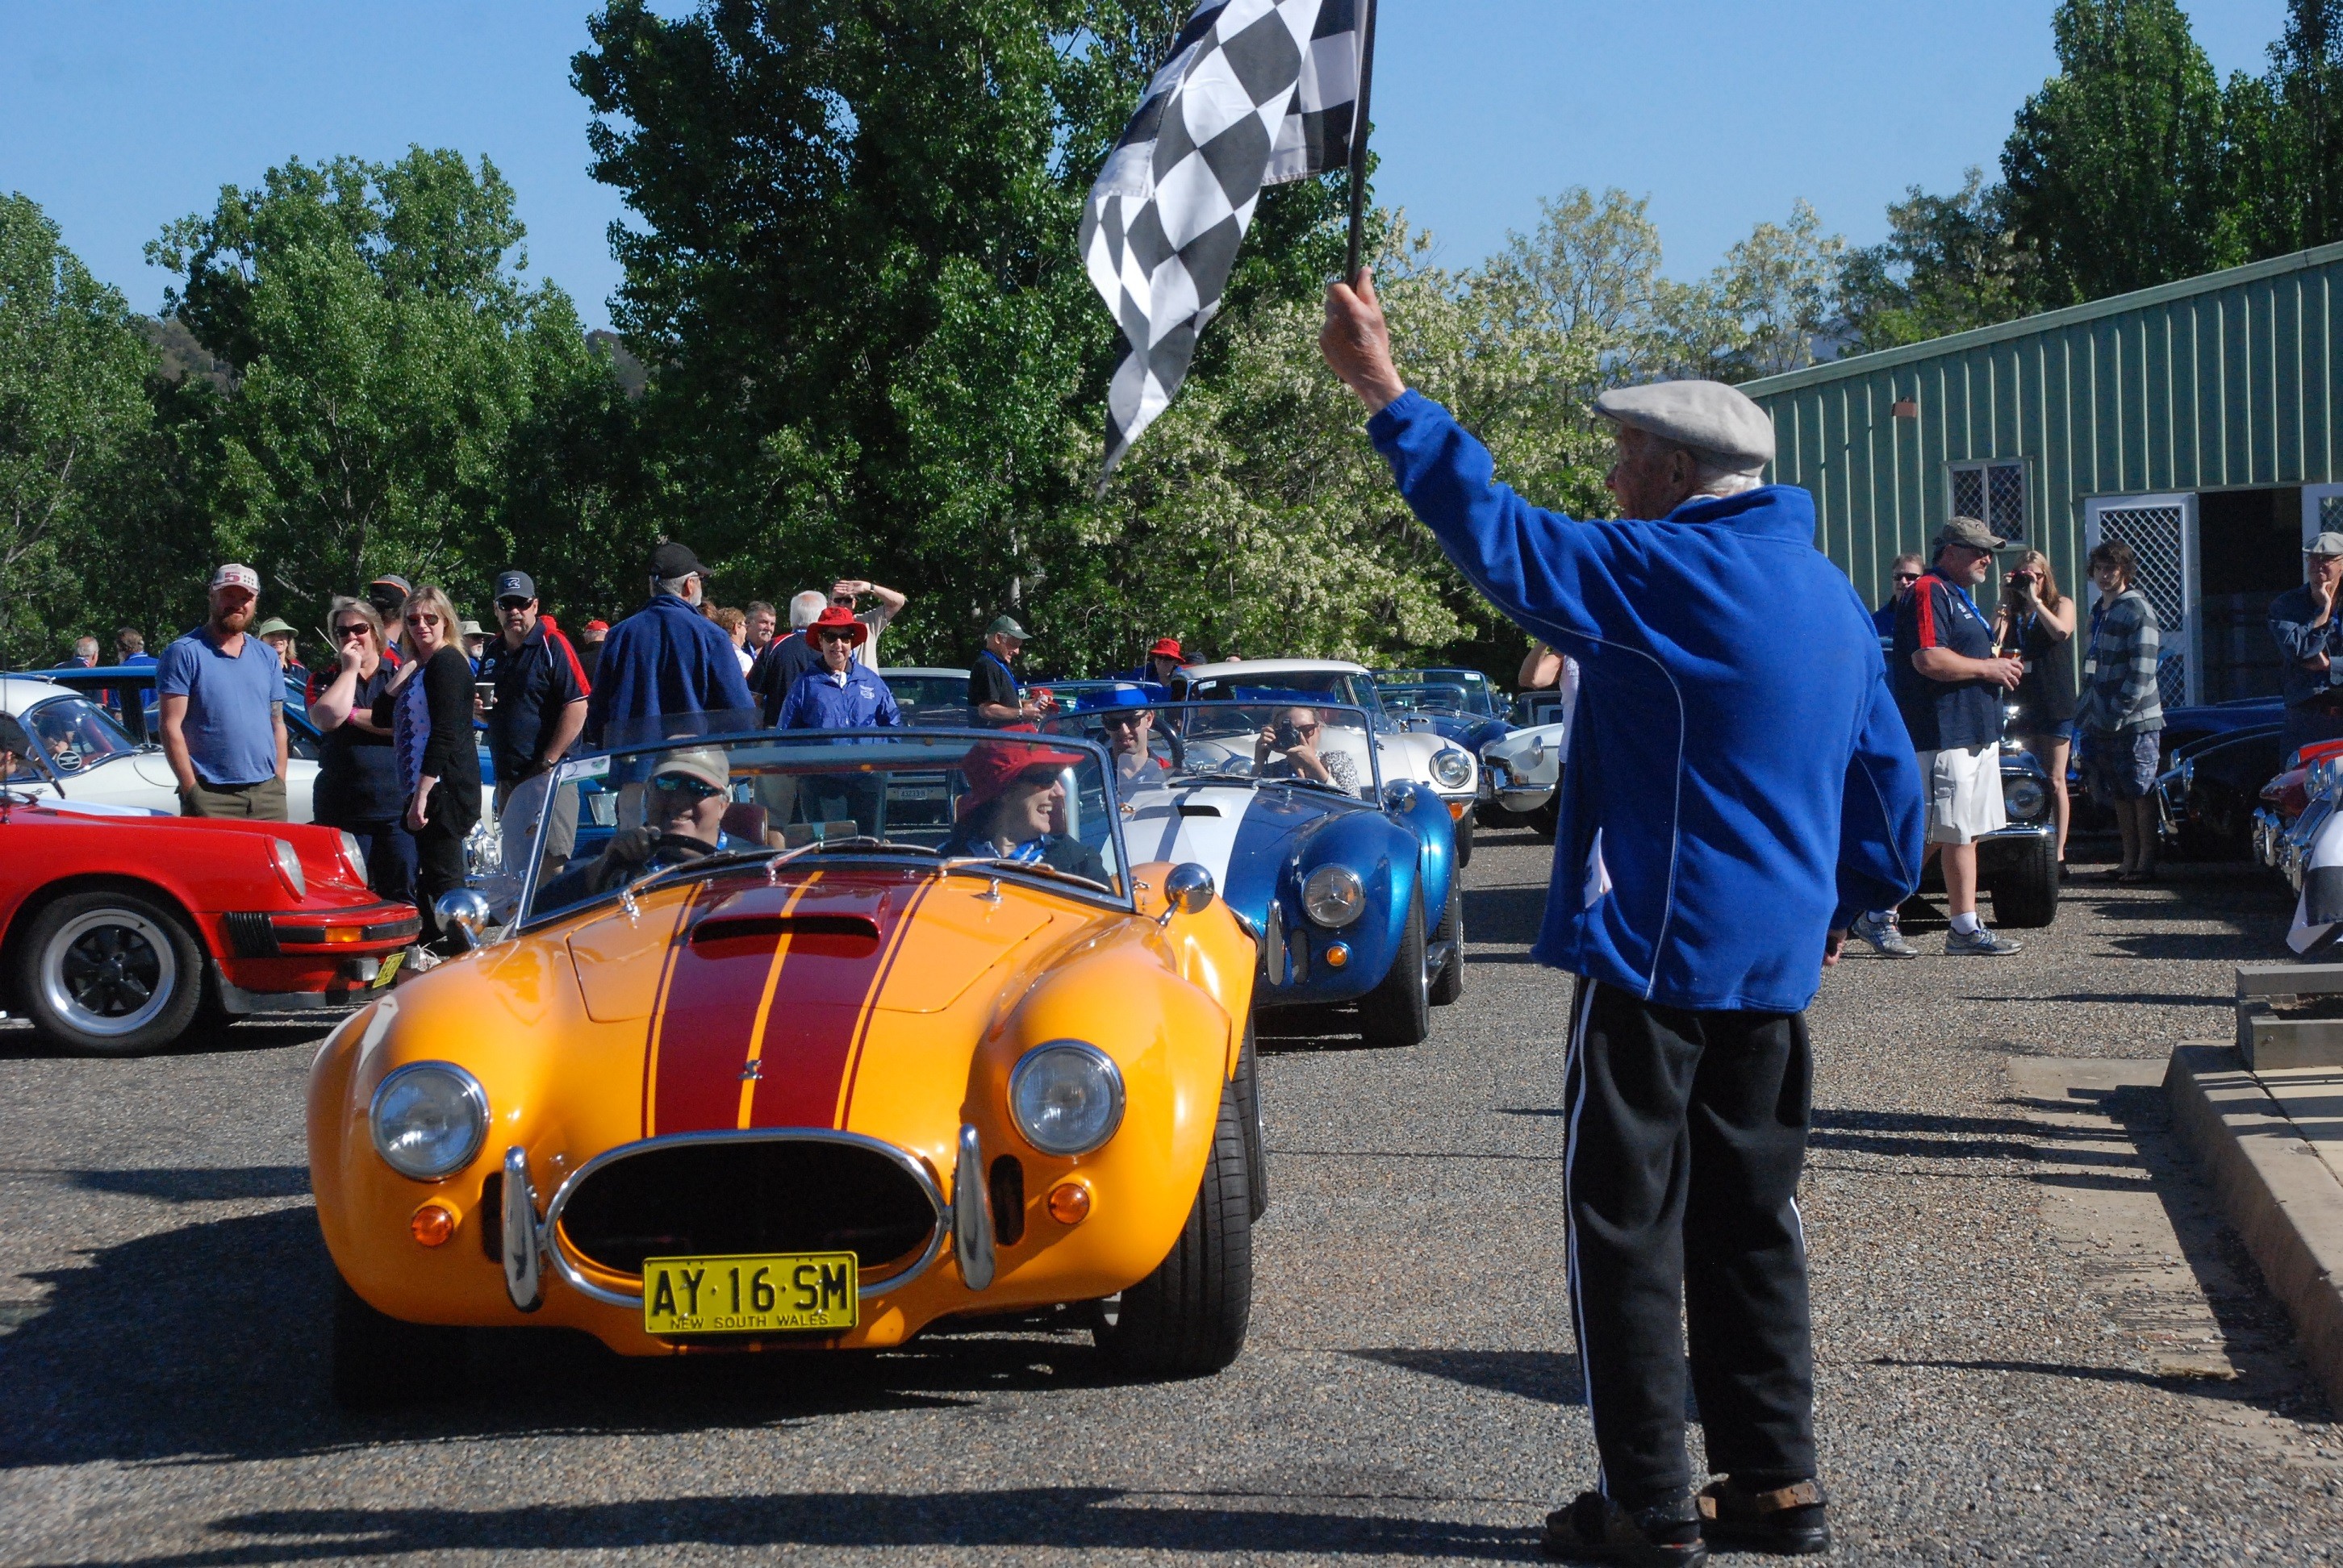 Cooma Car Club turns 20 this Saturday - join the party!